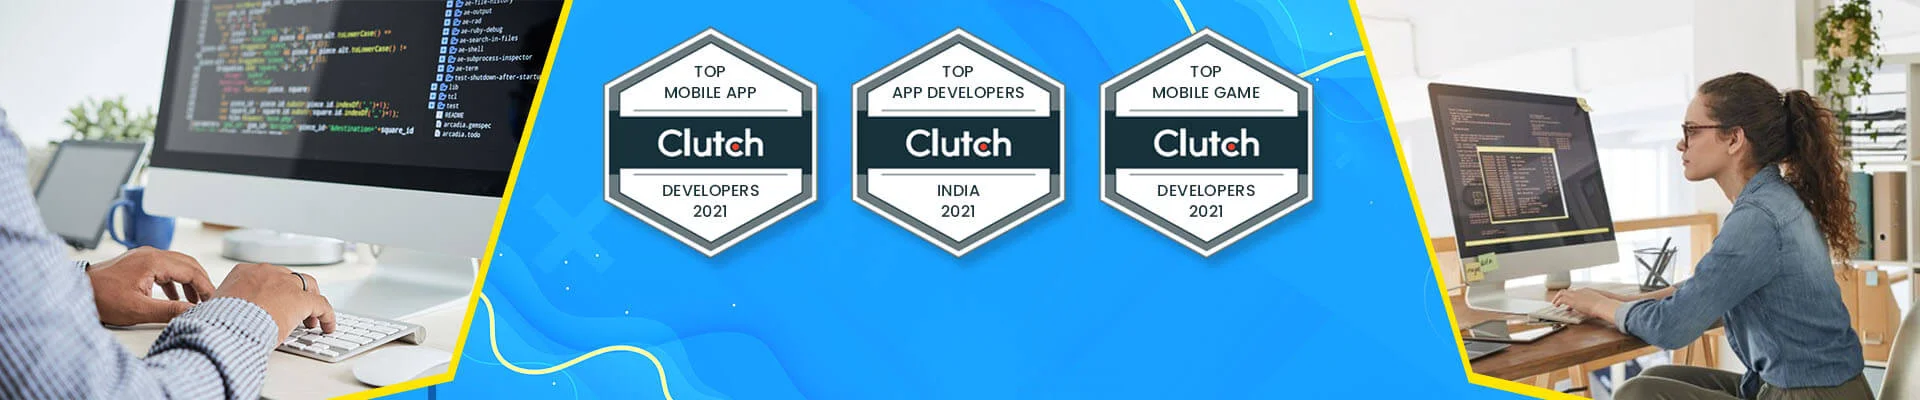 AGS Ranked As Top Game Developers, Top App Developers & Top Mobile App Development company For 2021 By Clutch